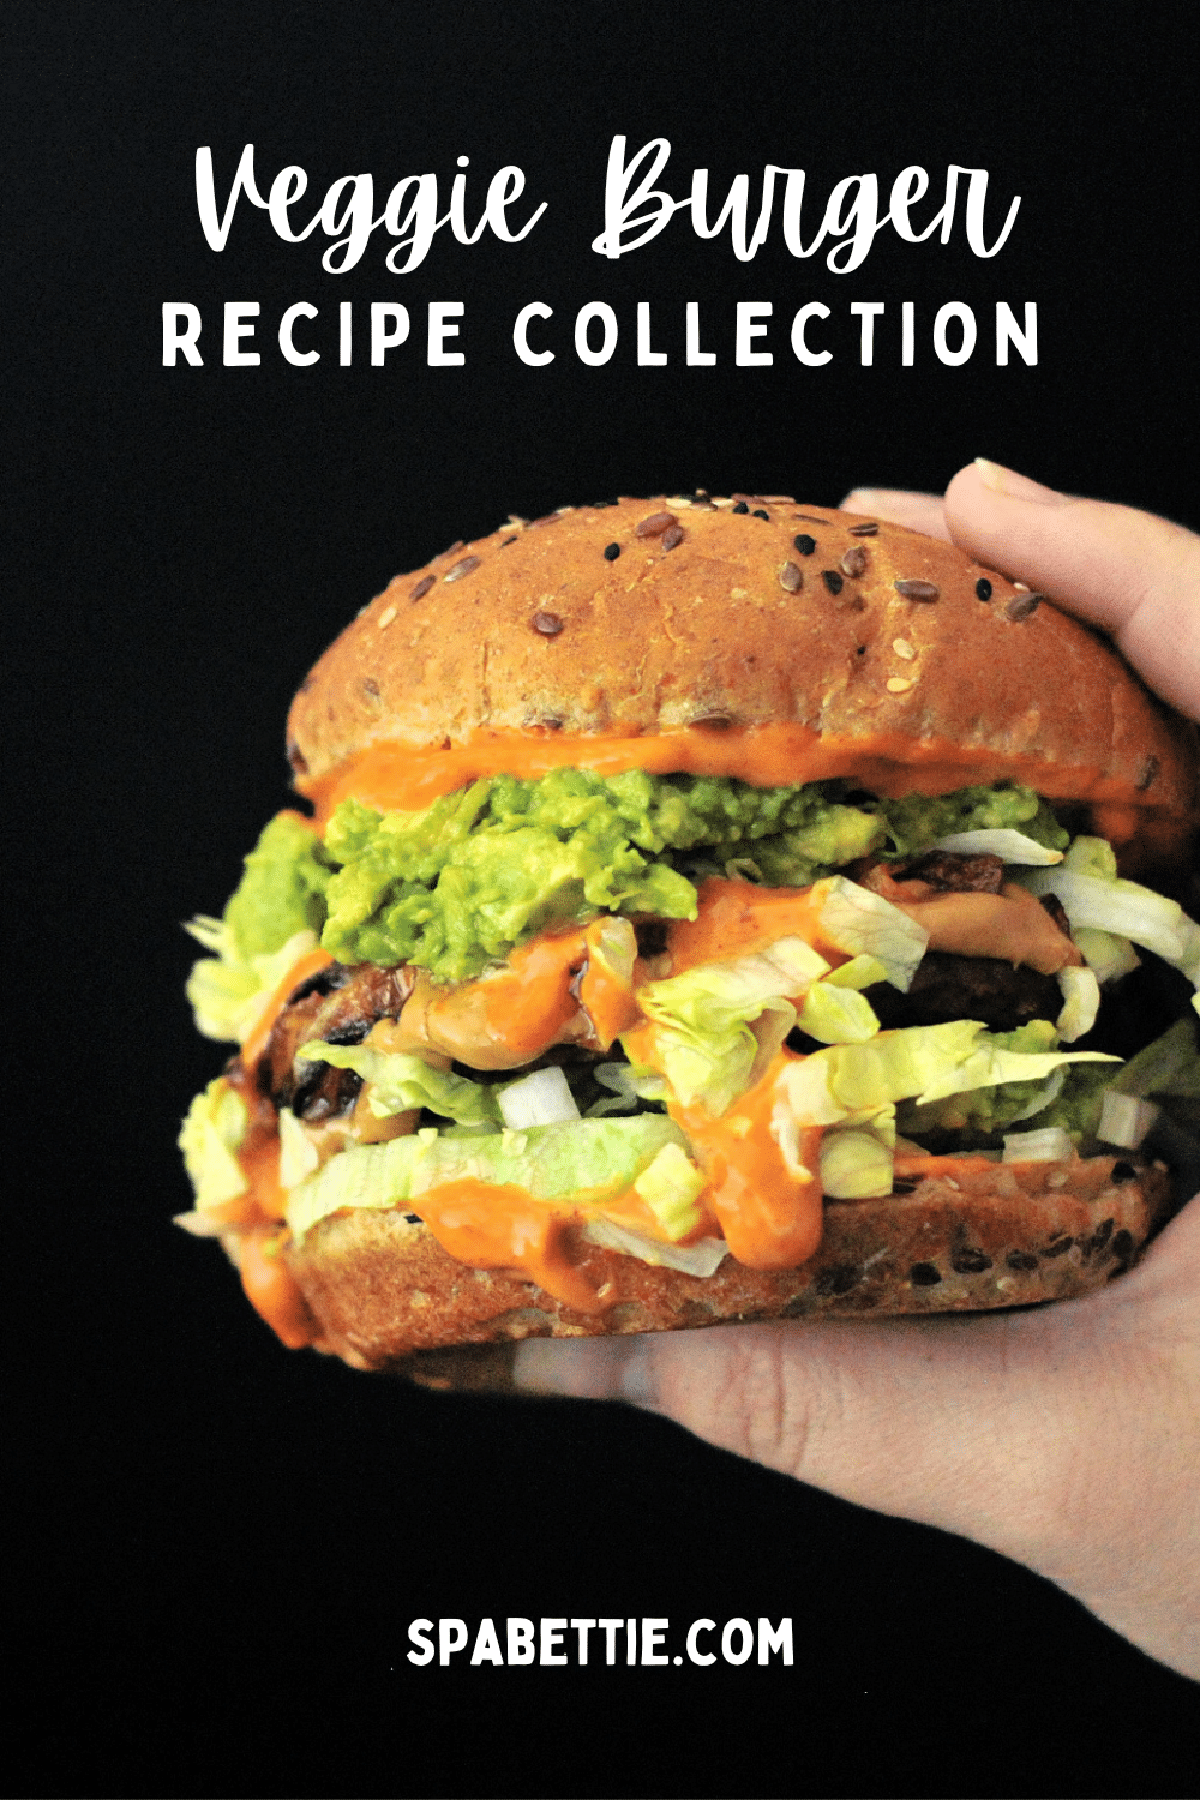 A spicy peanut butter burger held in a hand against a black background; burger has bright orange spicy kimchi sauce, shredded iceberg lettuce, a veggie patty, mashed avocado, and a seeded bun.